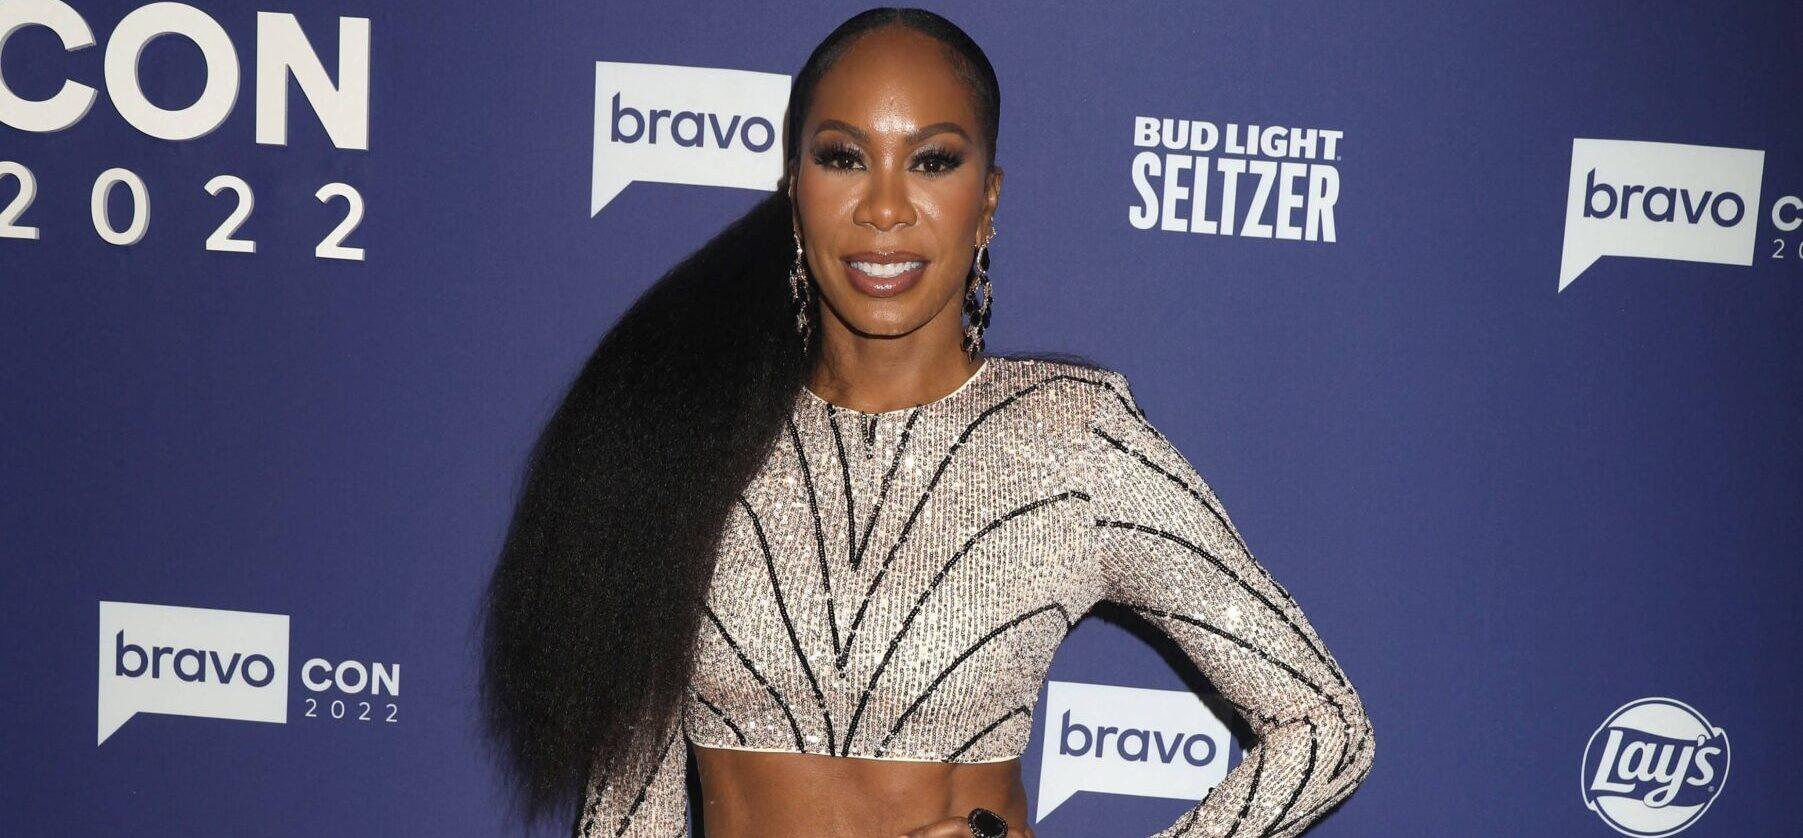 ‘RHOA’ Star Sanya Richards-Ross Partners With Wells Fargo To Support Black Small Businesses